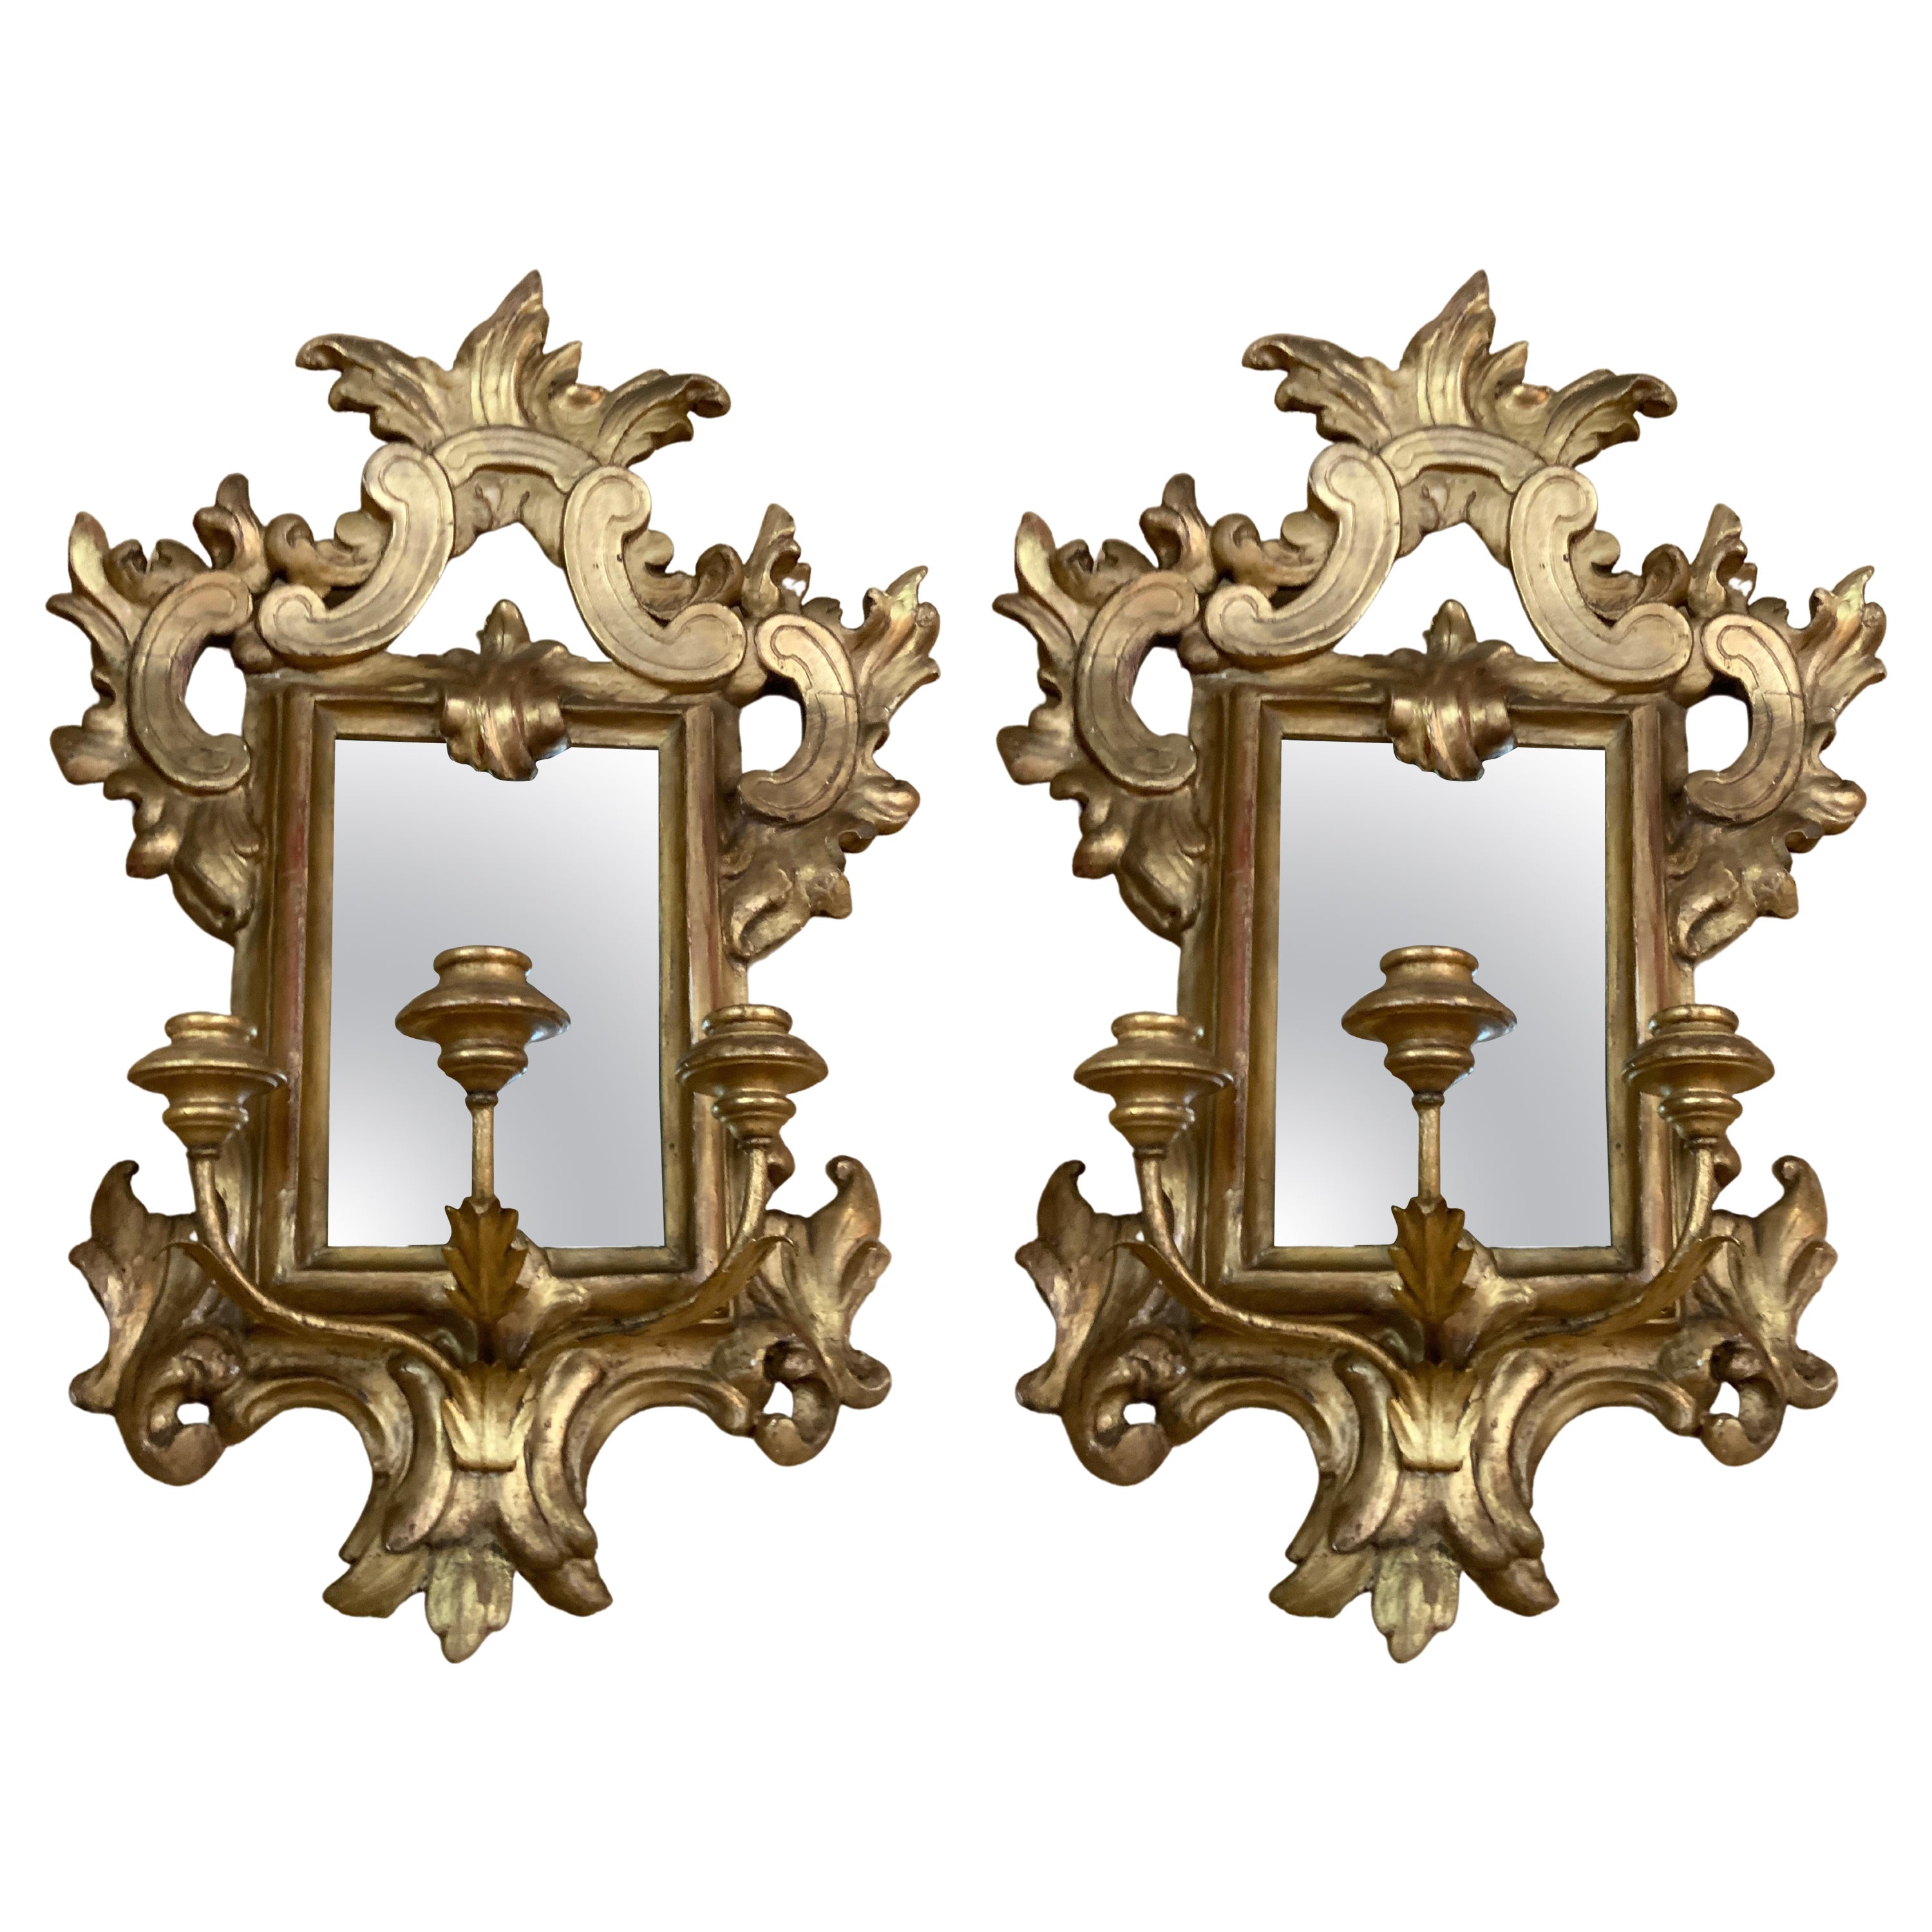 Pair of Giltwood and Mirror Sconces, 19th C. with 3 Nozzles Each